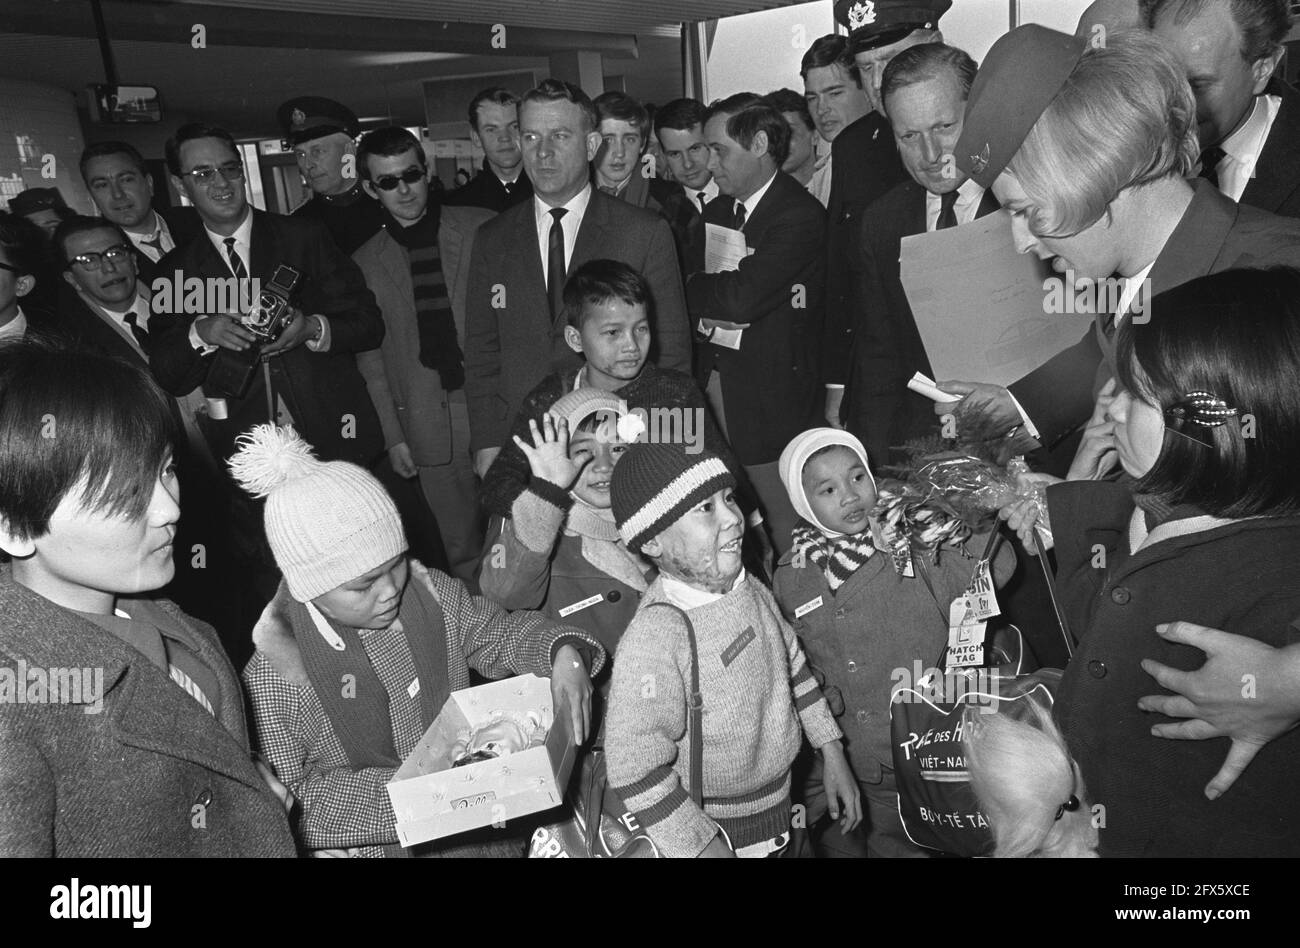 Arrival of Vietnamese children at Schiphol Airport. Troung Phai Anh Dao gives Le Thi Trai a doll on arrival, December 20, 1967, Children, arrivals, The Netherlands, 20th century press agency photo, news to remember, documentary, historic photography 1945-1990, visual stories, human history of the Twentieth Century, capturing moments in time Stock Photo